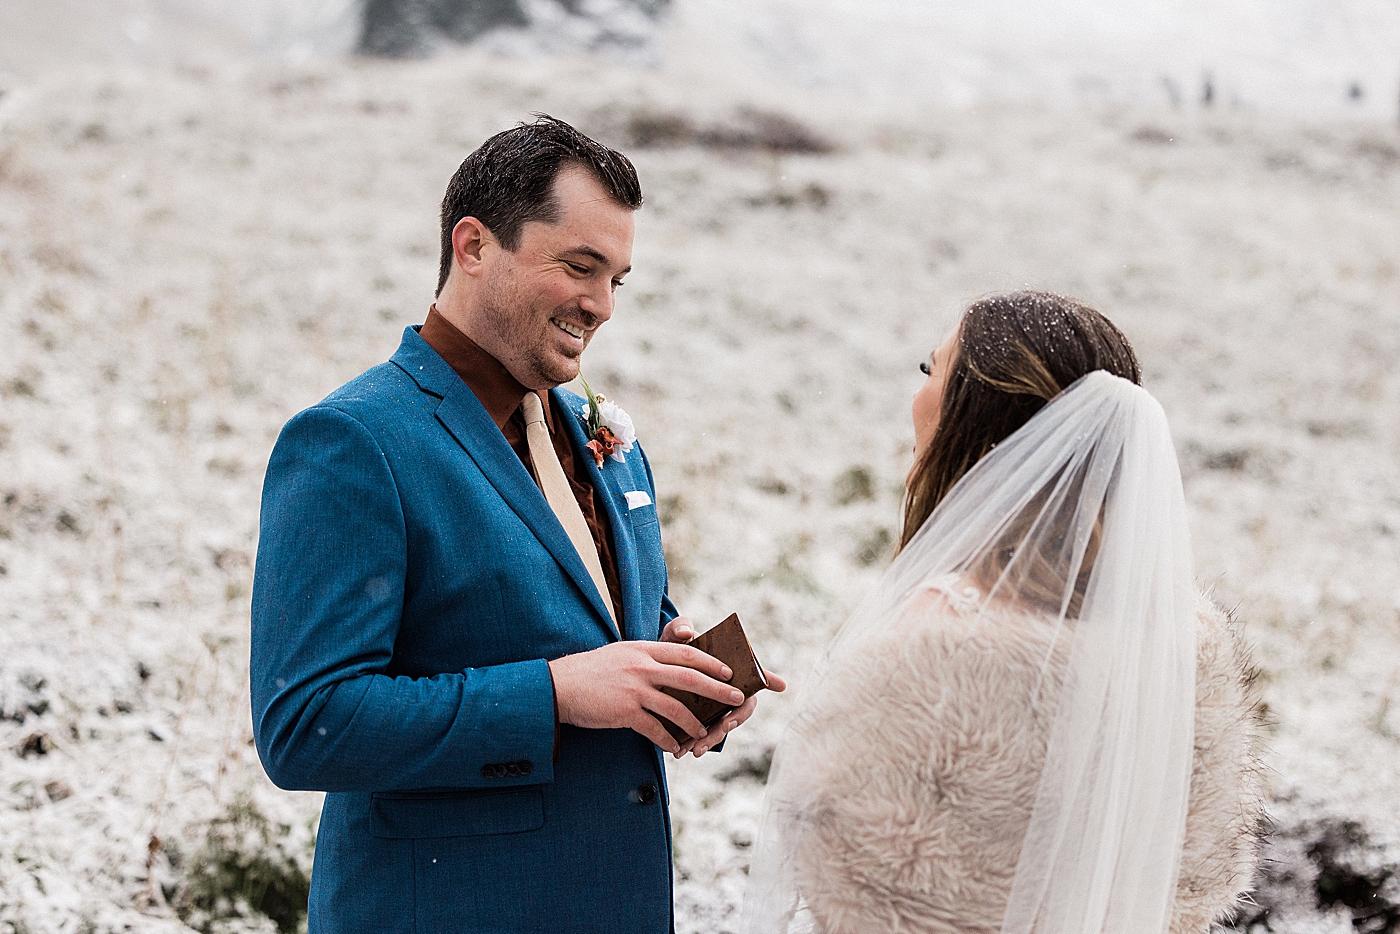 Bride and groom exchange vows in the snow at Paradise Point in Mount Rainier | Megan Montalvo Photography